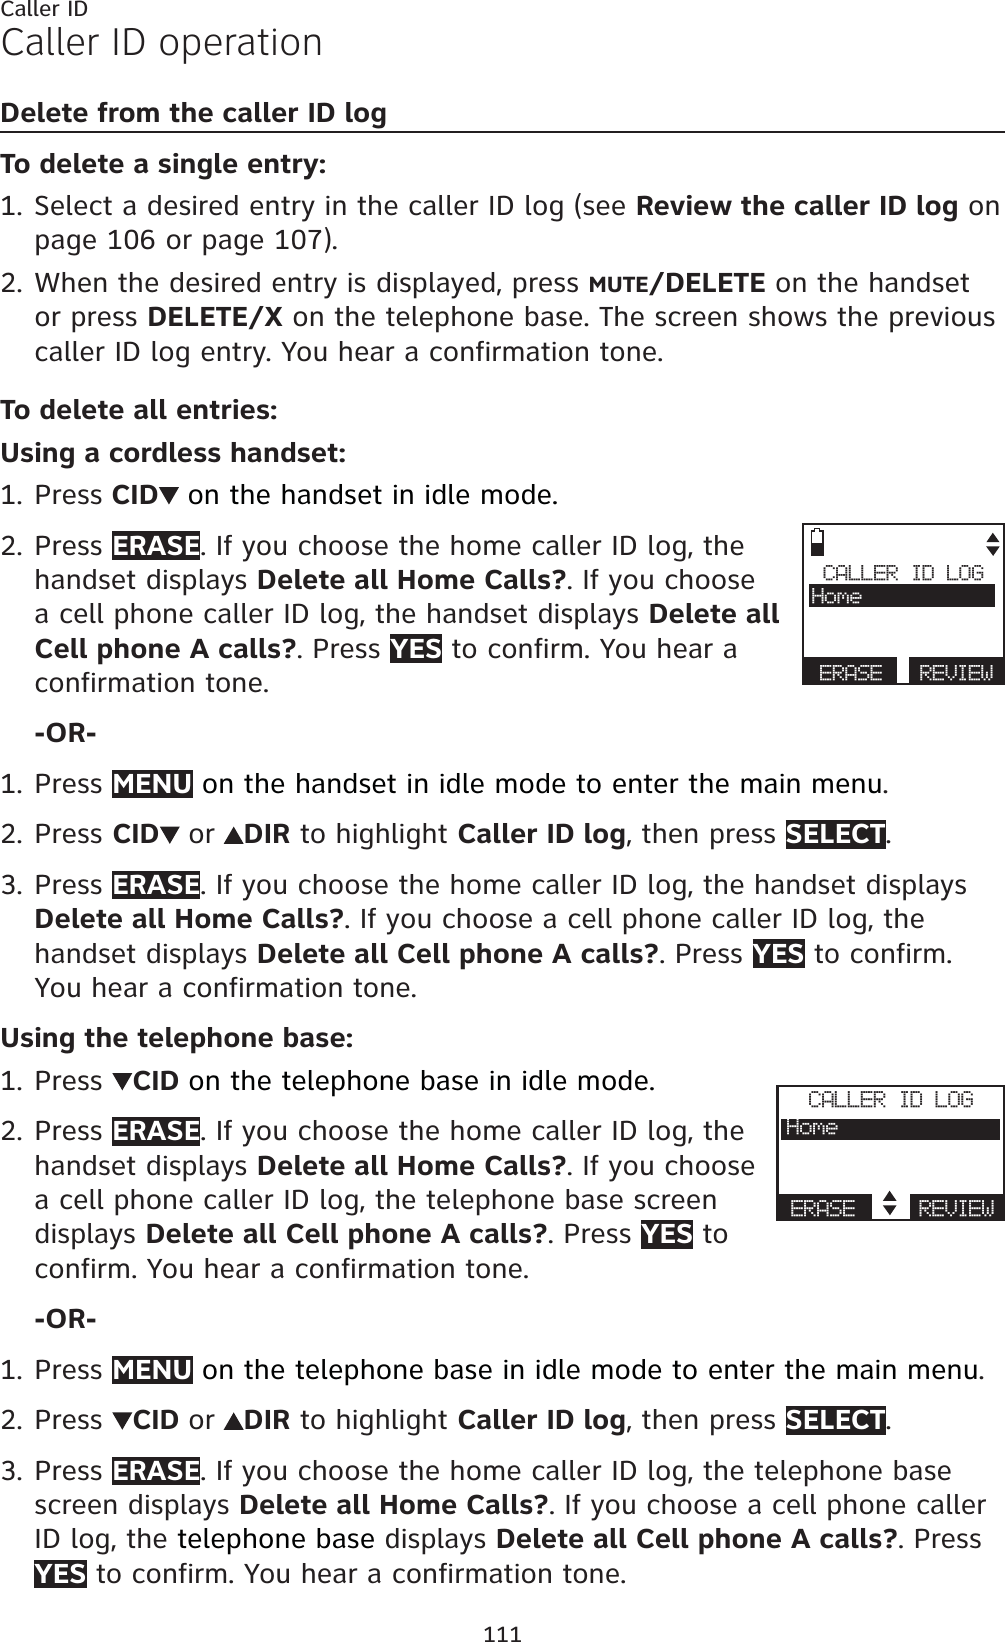 111Caller IDCaller ID operationDelete from the caller ID logTo delete a single entry:Select a desired entry in the caller ID log (see Review the caller ID log on page 106 or page 107).When the desired entry is displayed, press MUTE/DELETE on the handset or press DELETE/X on the telephone base. The screen shows the previous caller ID log entry. You hear a confirmation tone.To delete all entries:Using a cordless handset:Press CID on the handset in idle mode.Press ERASE. If you choose the home caller ID log, the handset displays Delete all Home Calls?. If you choose a cell phone caller ID log, the handset displays Delete all Cell phone A calls?. Press YES to confirm. You hear a confirmation tone.-OR-Press MENU on the handset in idle mode to enter the main menu.Press CID or DIR to highlight Caller ID log, then press SELECT.Press ERASE. If you choose the home caller ID log, the handset displays Delete all Home Calls?. If you choose a cell phone caller ID log, the handset displays Delete all Cell phone A calls?. Press YES to confirm. You hear a confirmation tone.Using the telephone base:Press  CID on the telephone base in idle mode.Press ERASE. If you choose the home caller ID log, the handset displays Delete all Home Calls?. If you choose a cell phone caller ID log, the telephone base screendisplays Delete all Cell phone A calls?. Press YES to confirm. You hear a confirmation tone.-OR-Press MENU on the telephone base in idle mode to enter the main menu.Press CID or DIR to highlight Caller ID log, then press SELECT.Press ERASE. If you choose the home caller ID log, the telephone base screen displays Delete all Home Calls?. If you choose a cell phone caller ID log, the telephone base displays Delete all Cell phone A calls?. Press YES to confirm. You hear a confirmation tone.1.2.1.2.1.2.3.1.2.1.2.3.CALLER ID LOGHomeERASE REVIEWCALLER ID LOGHomeERASE REVIEW